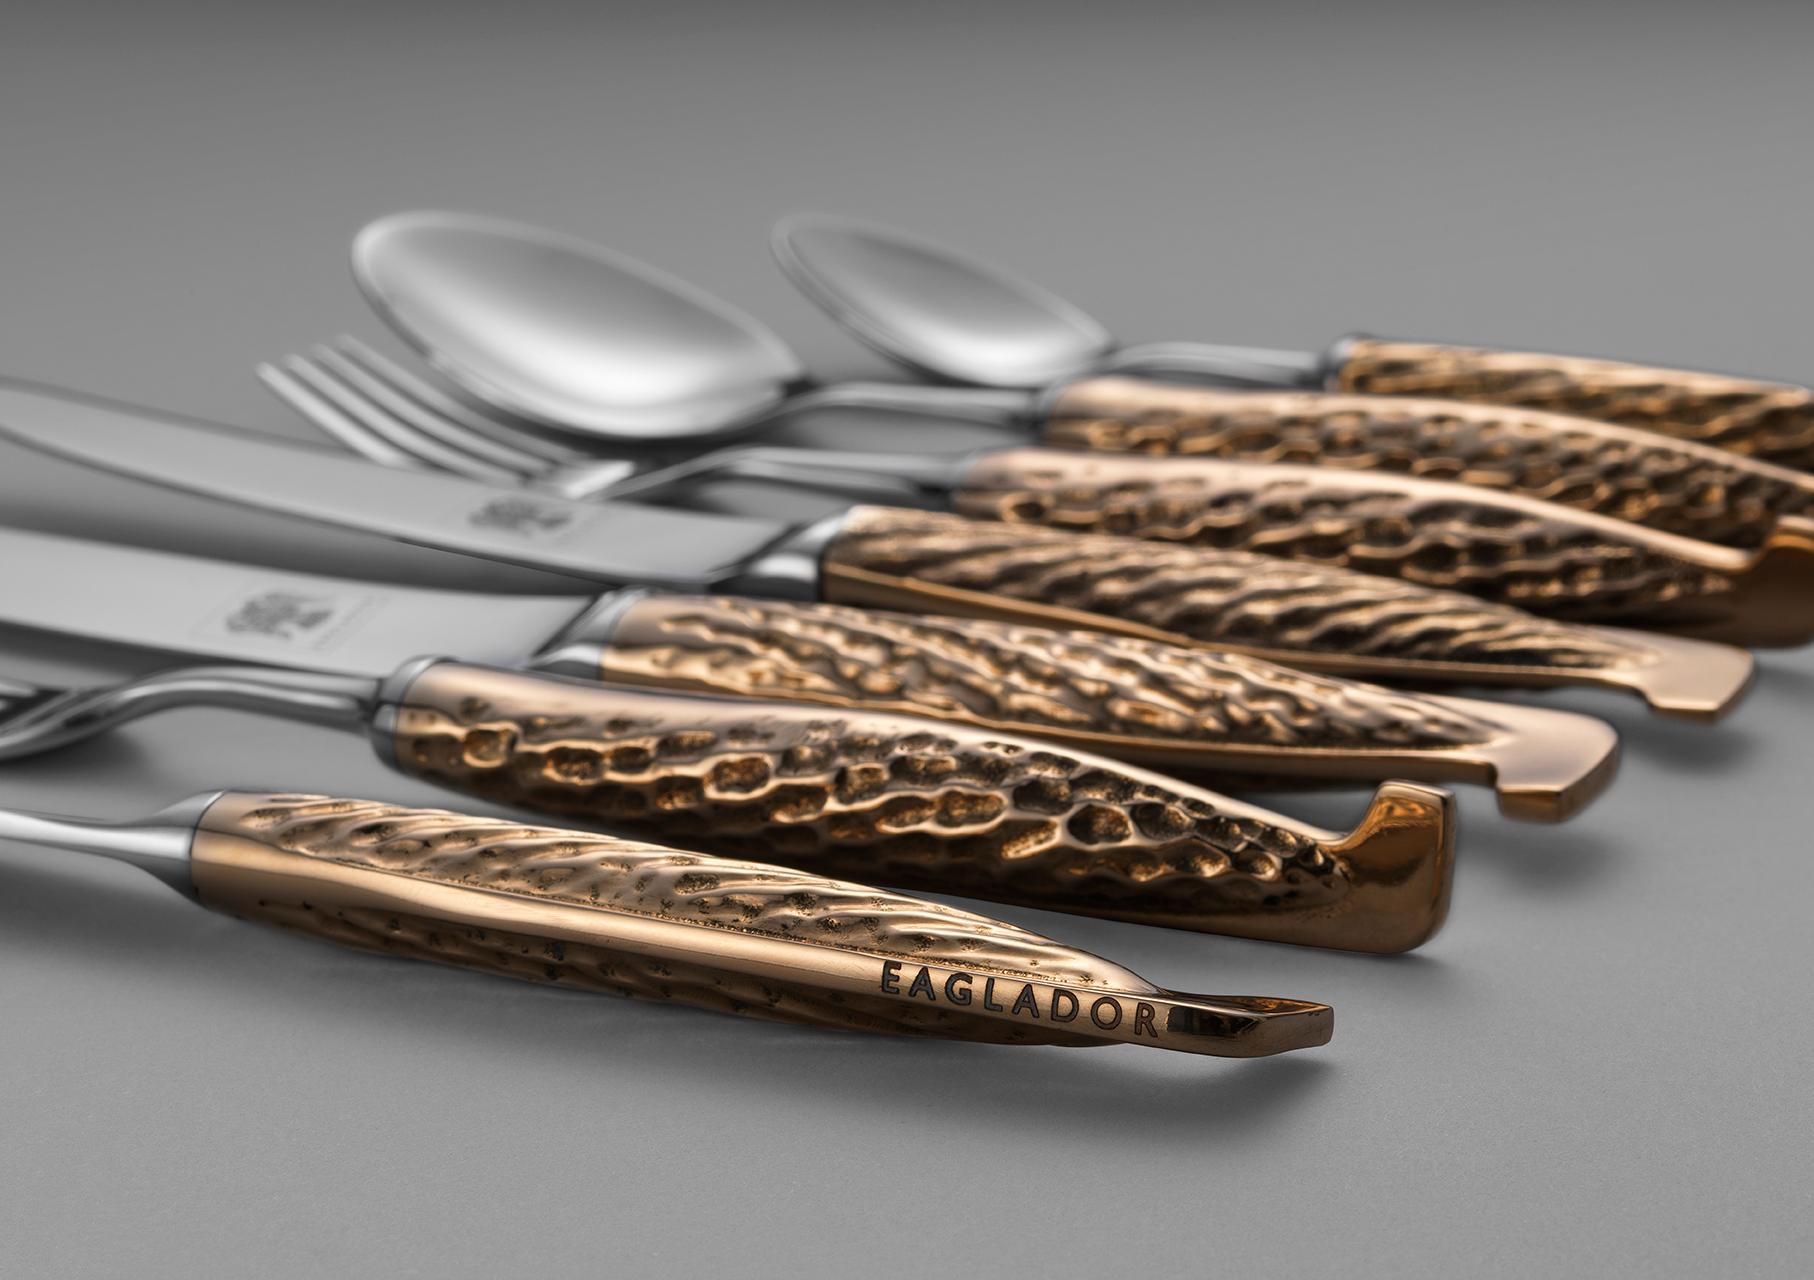 Eaglador bronze handled flatware has been designed to imitate a switch-blade. 

Contemporary in style, the handle has been cast and shows wrought sculptural detail which contrasts nicely to the polished spine and steel. 

The collection has been